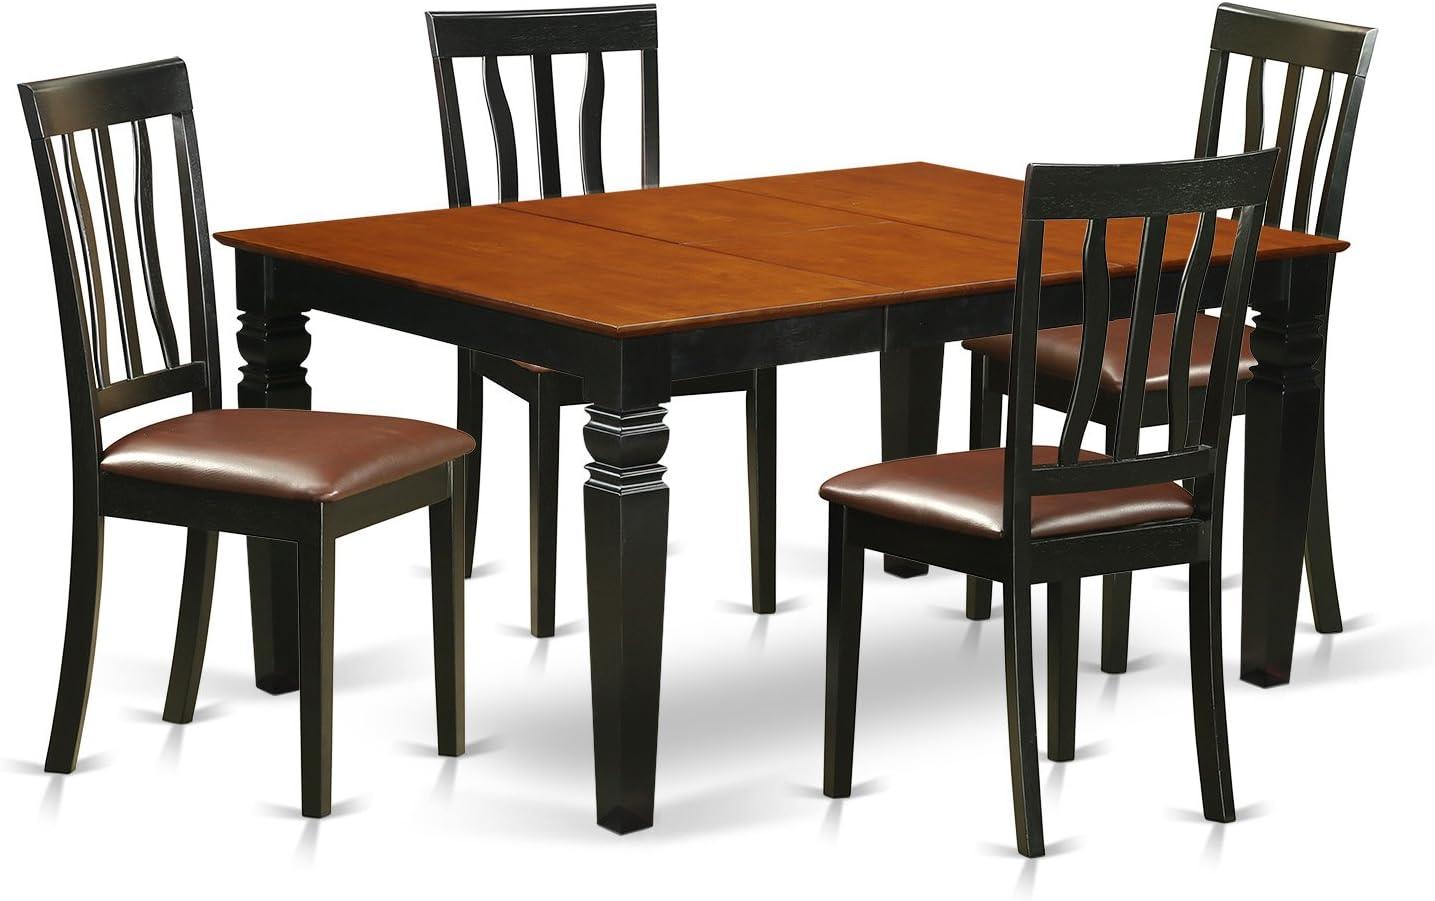 Weston 5-Piece Black & Cherry Dining Set with Leather-Seat Chairs